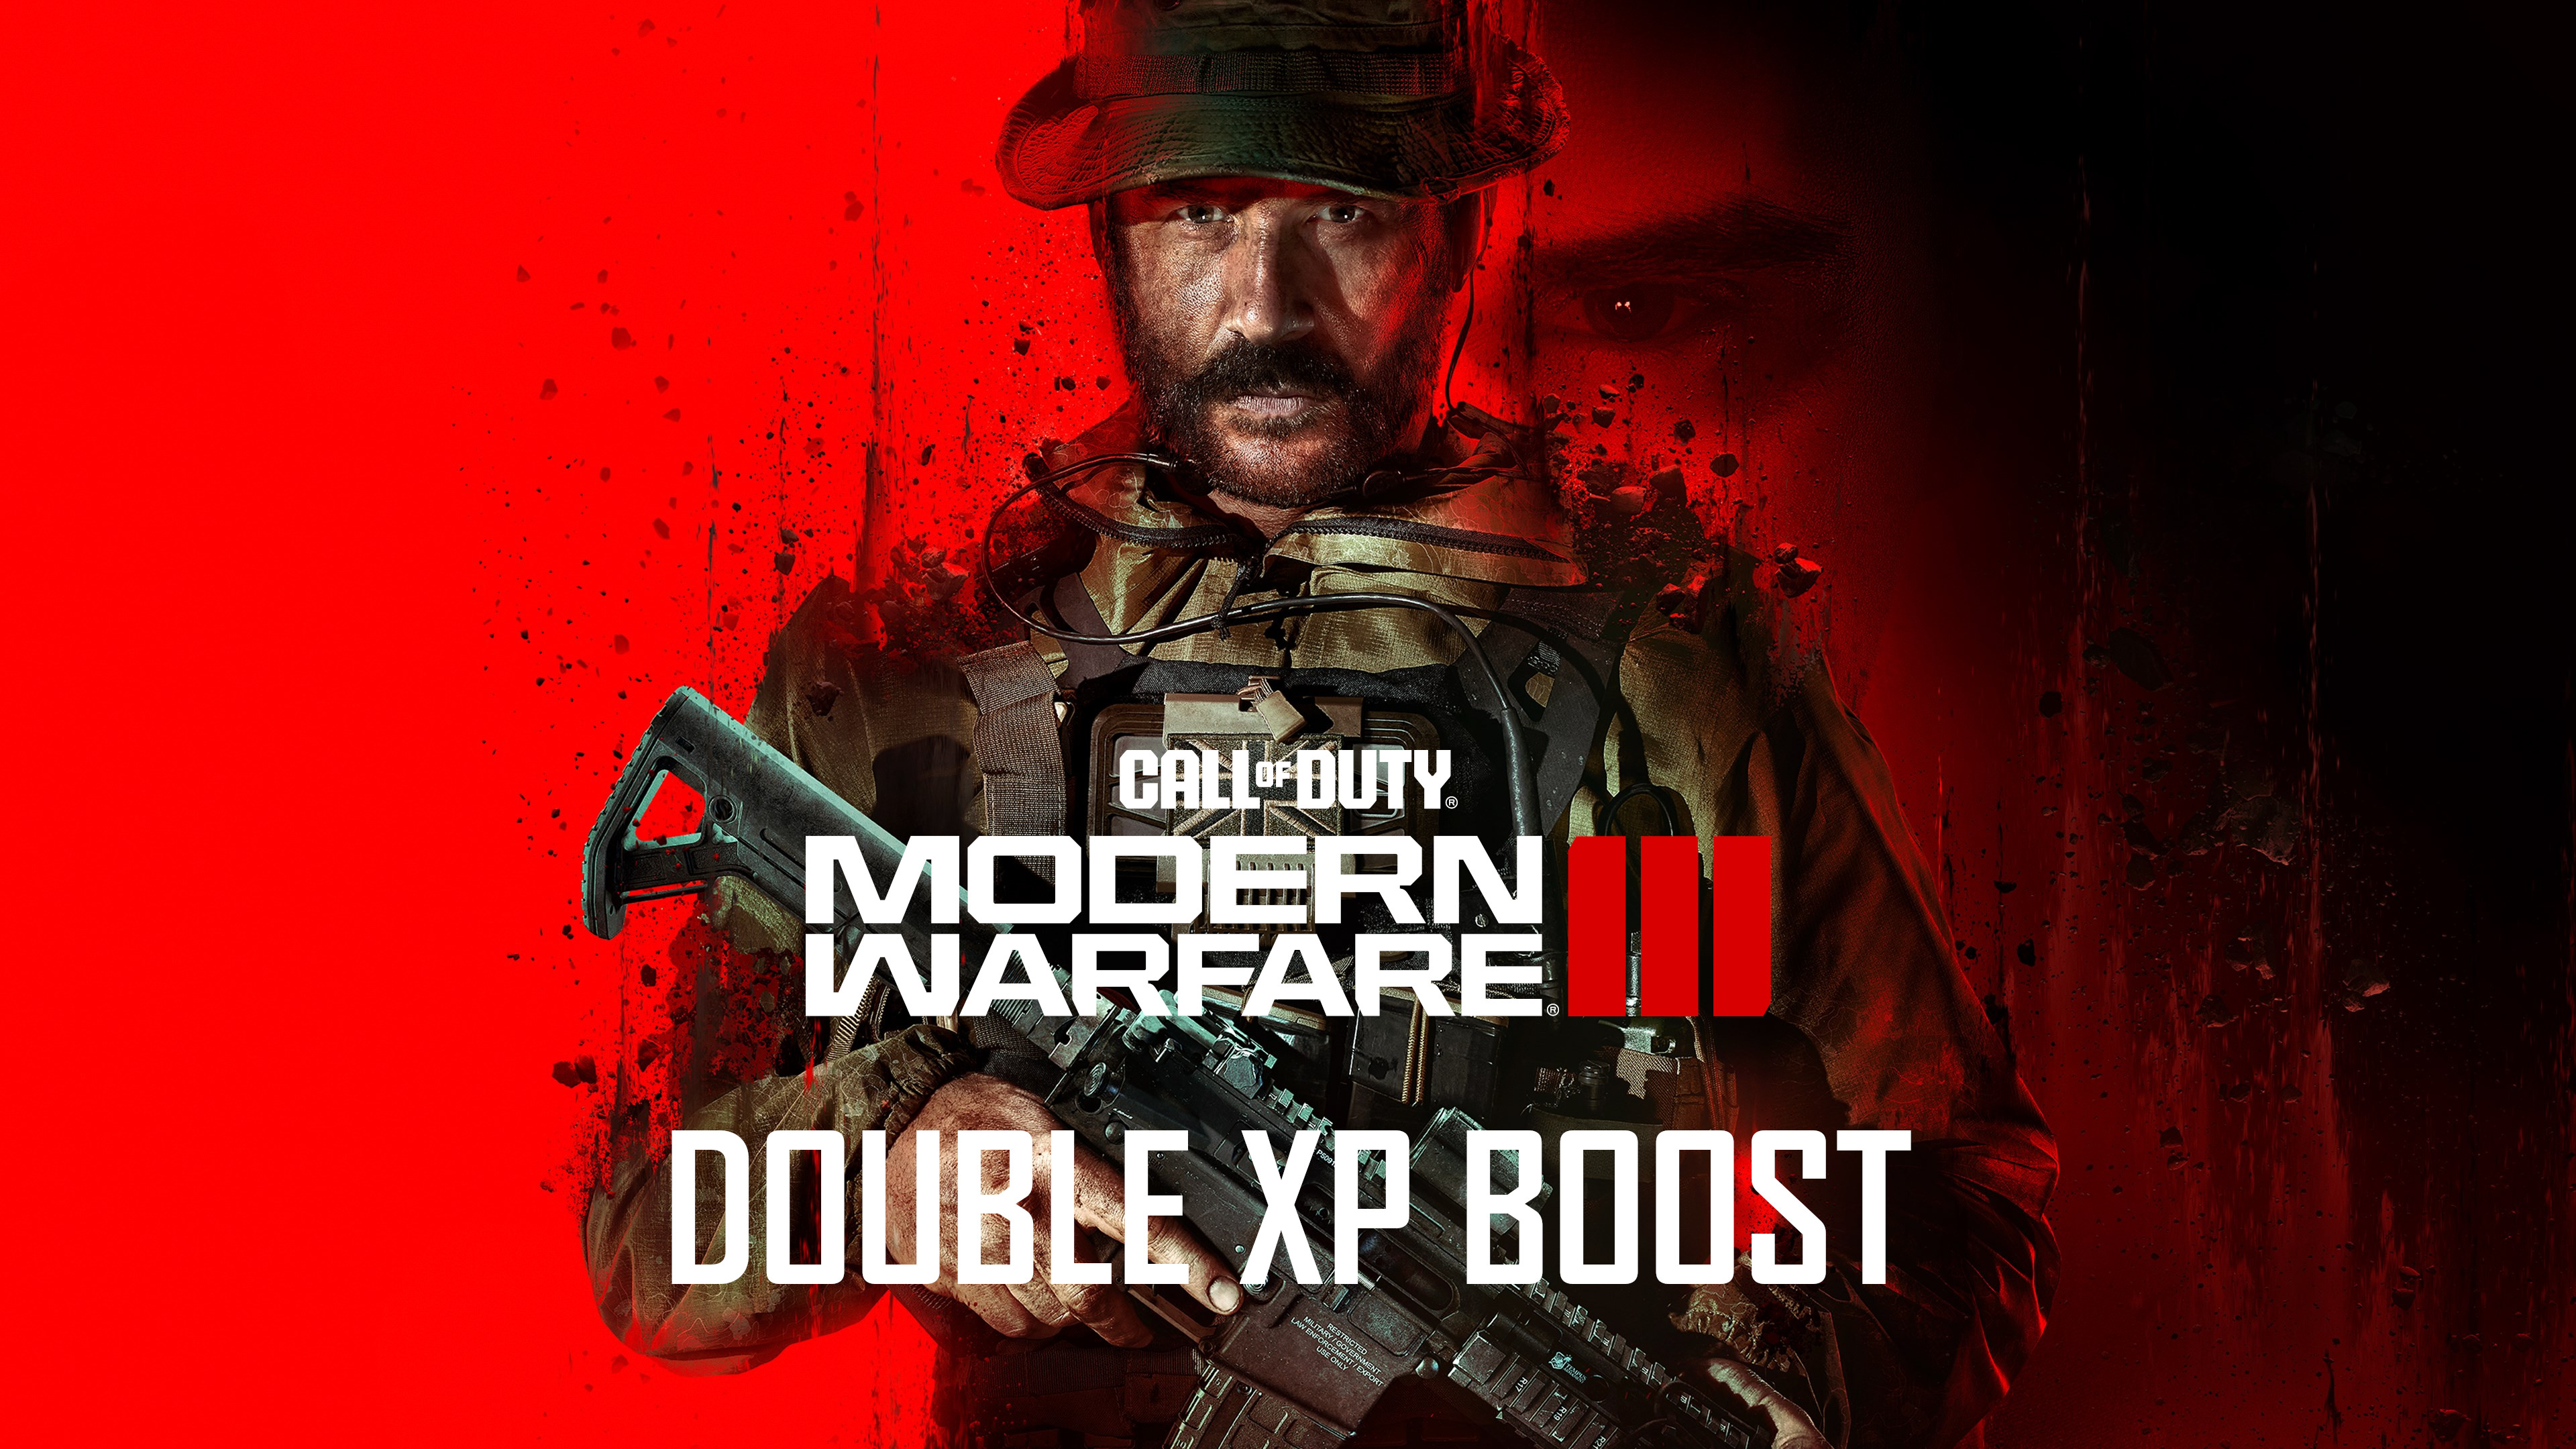 Call of Duty: Modern Warfare III - 5 Hours Double XP Boost PC/PS4/PS5/XBOX One/Series X|S CD Key 4.52 $